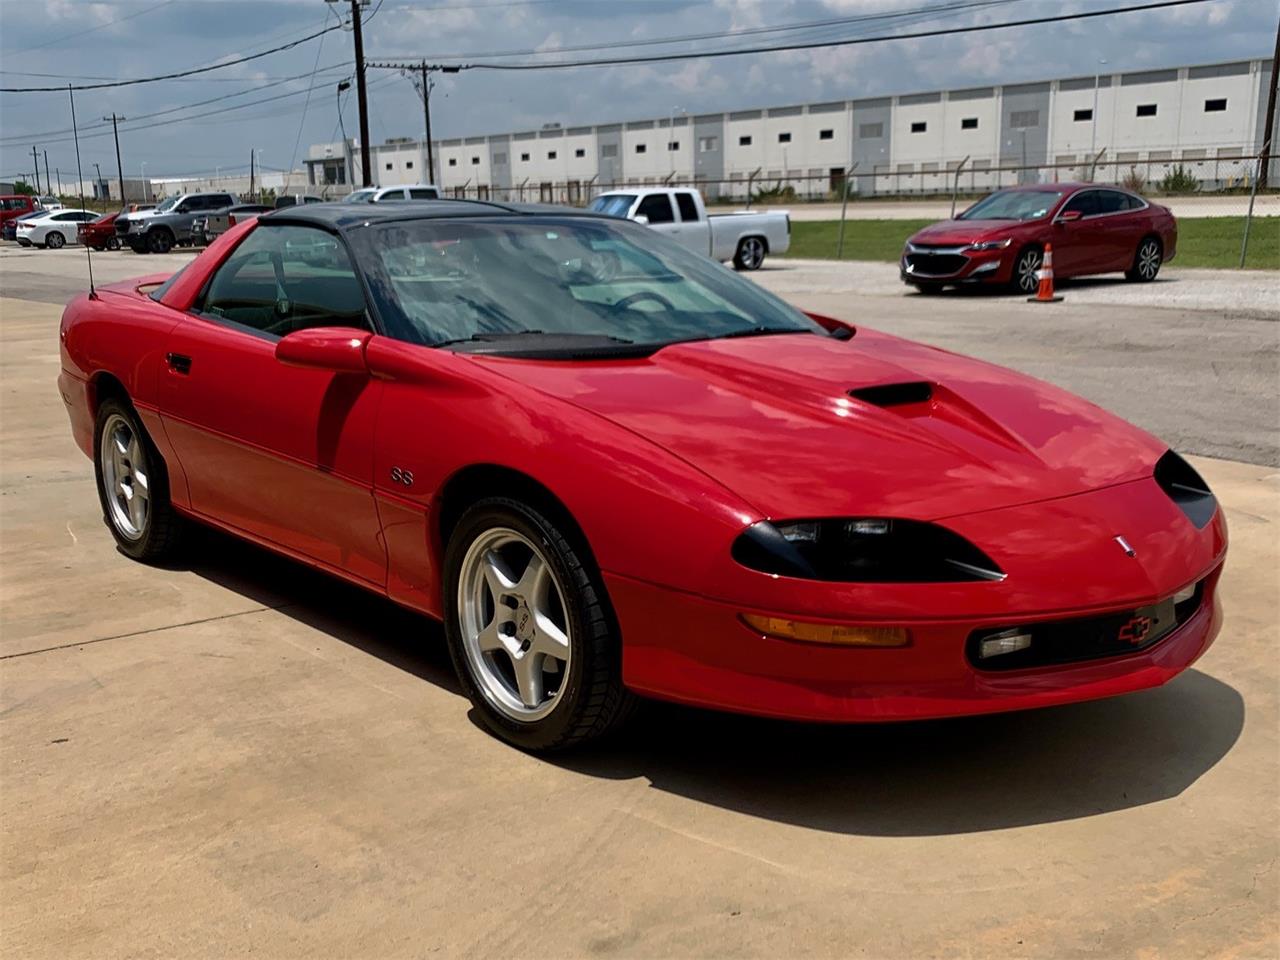 For Sale: 1996 Chevrolet Camaro SS Z28 in Fort Worth, Texas for sale in Fort Worth, TX